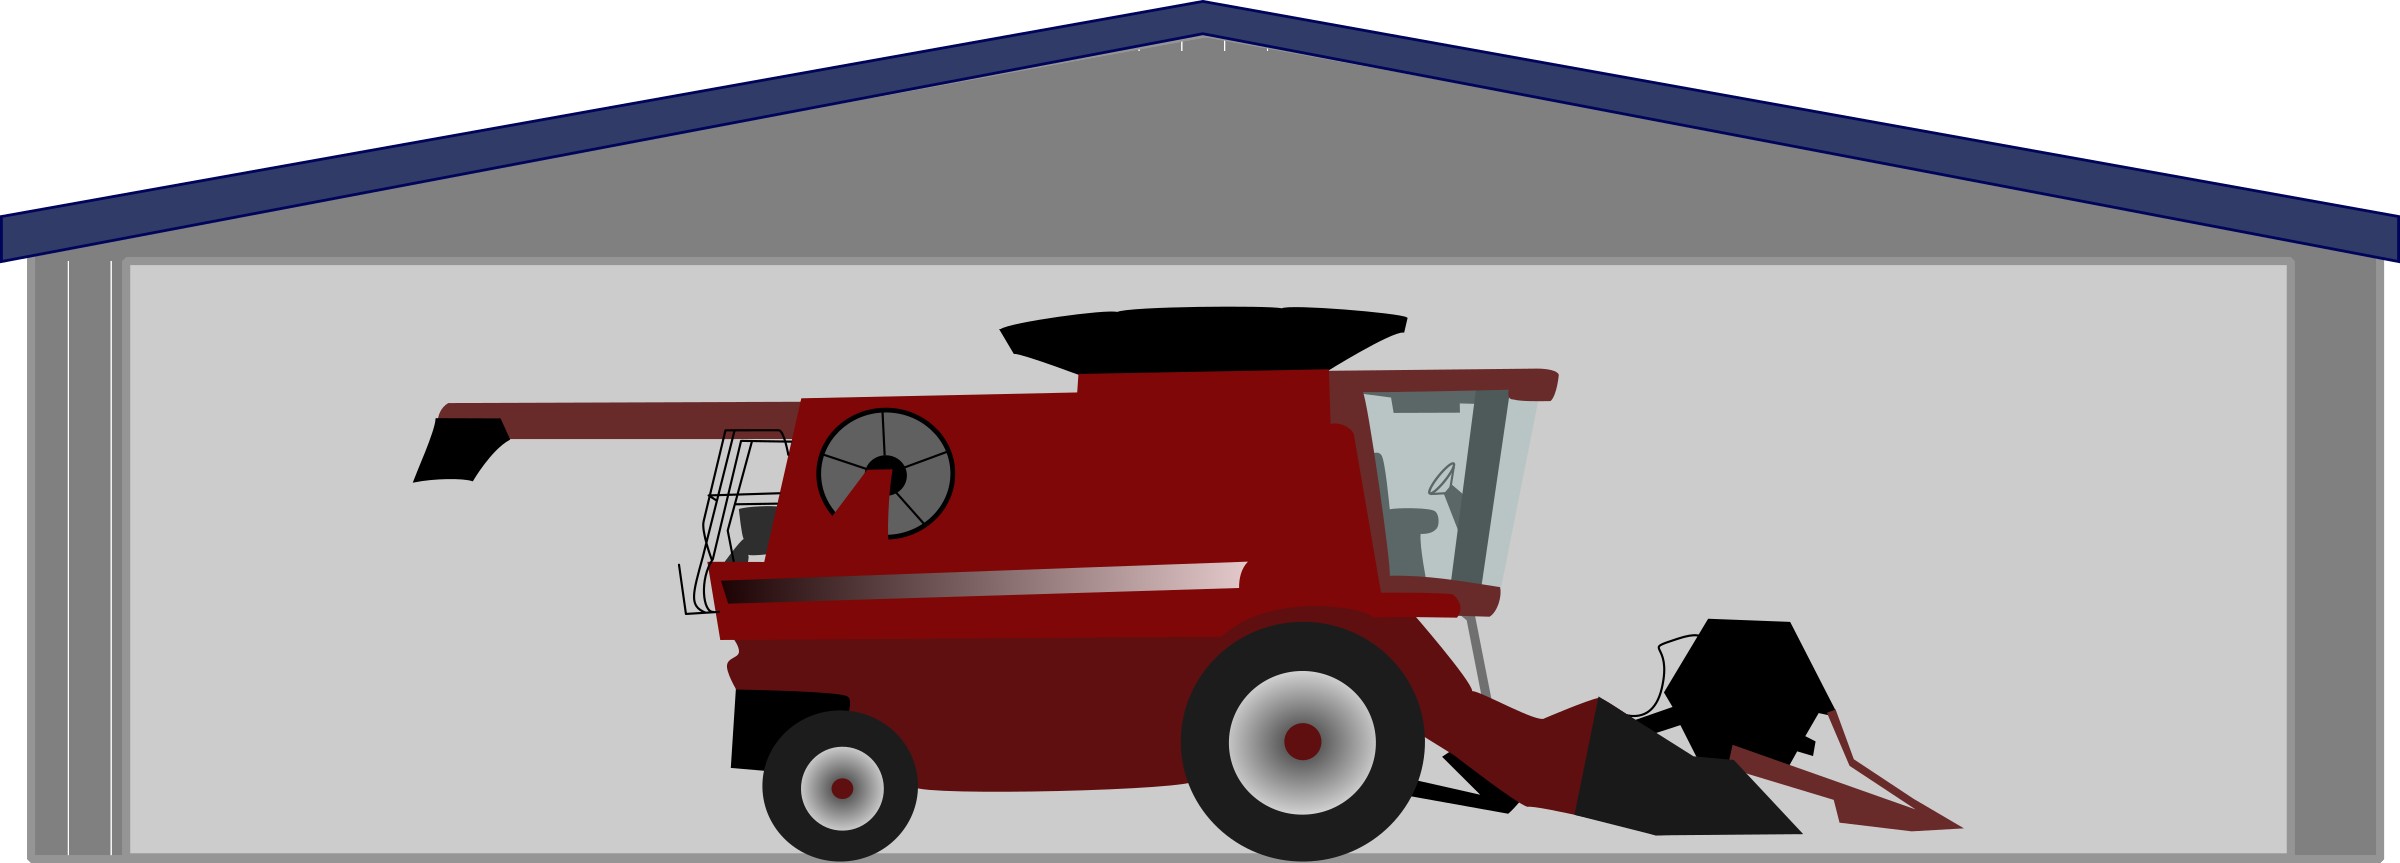 Combine Harvester In Shed